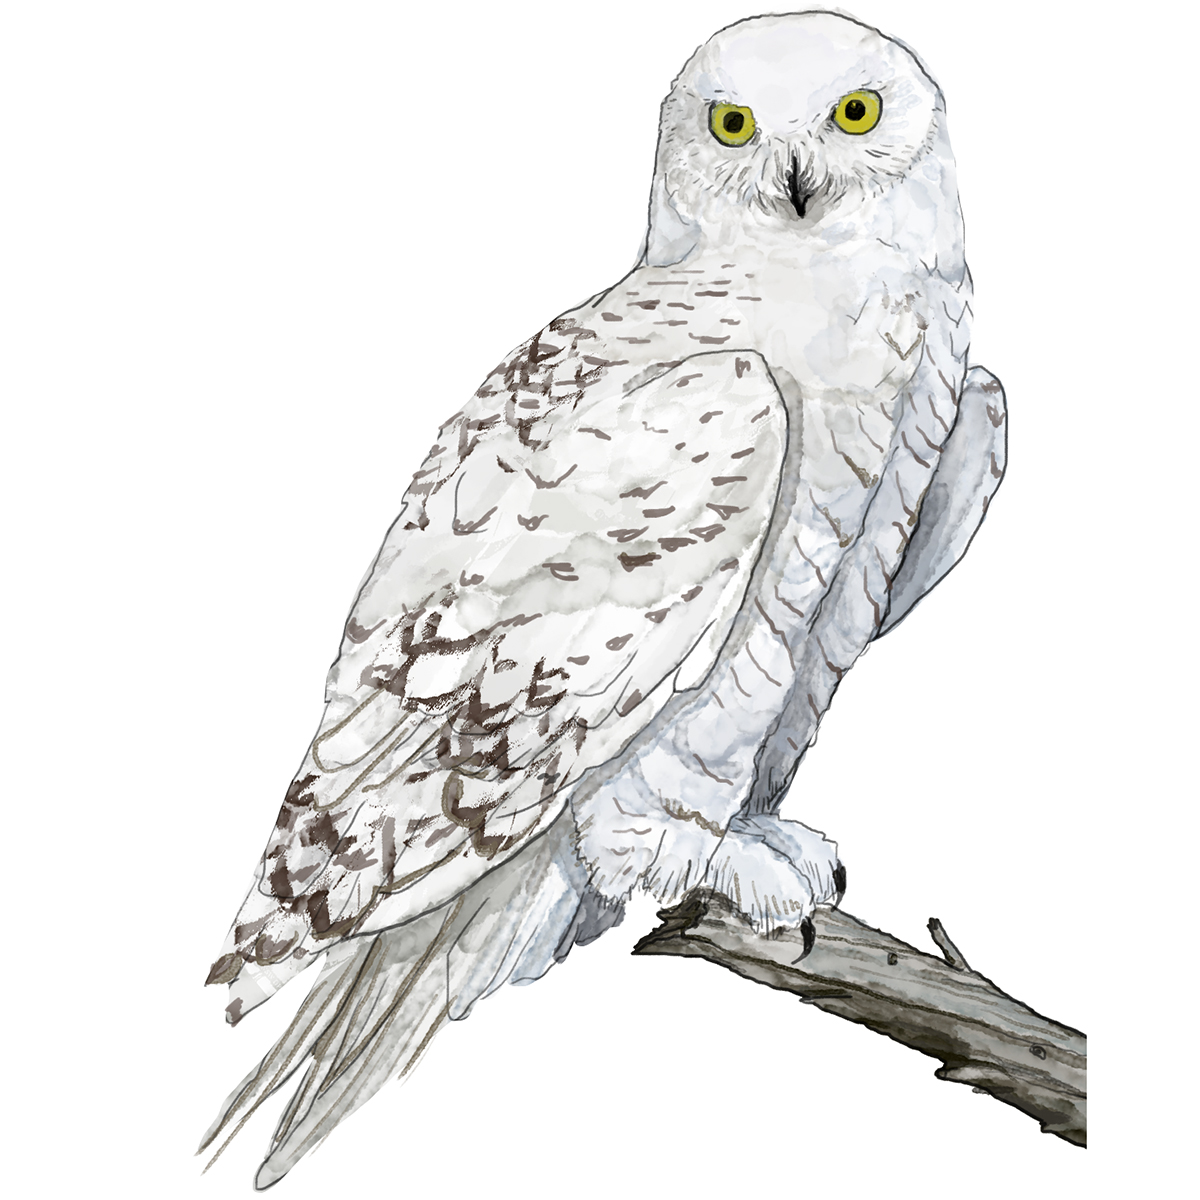 Snowy Owl Illustration by Ellaphant in the Room